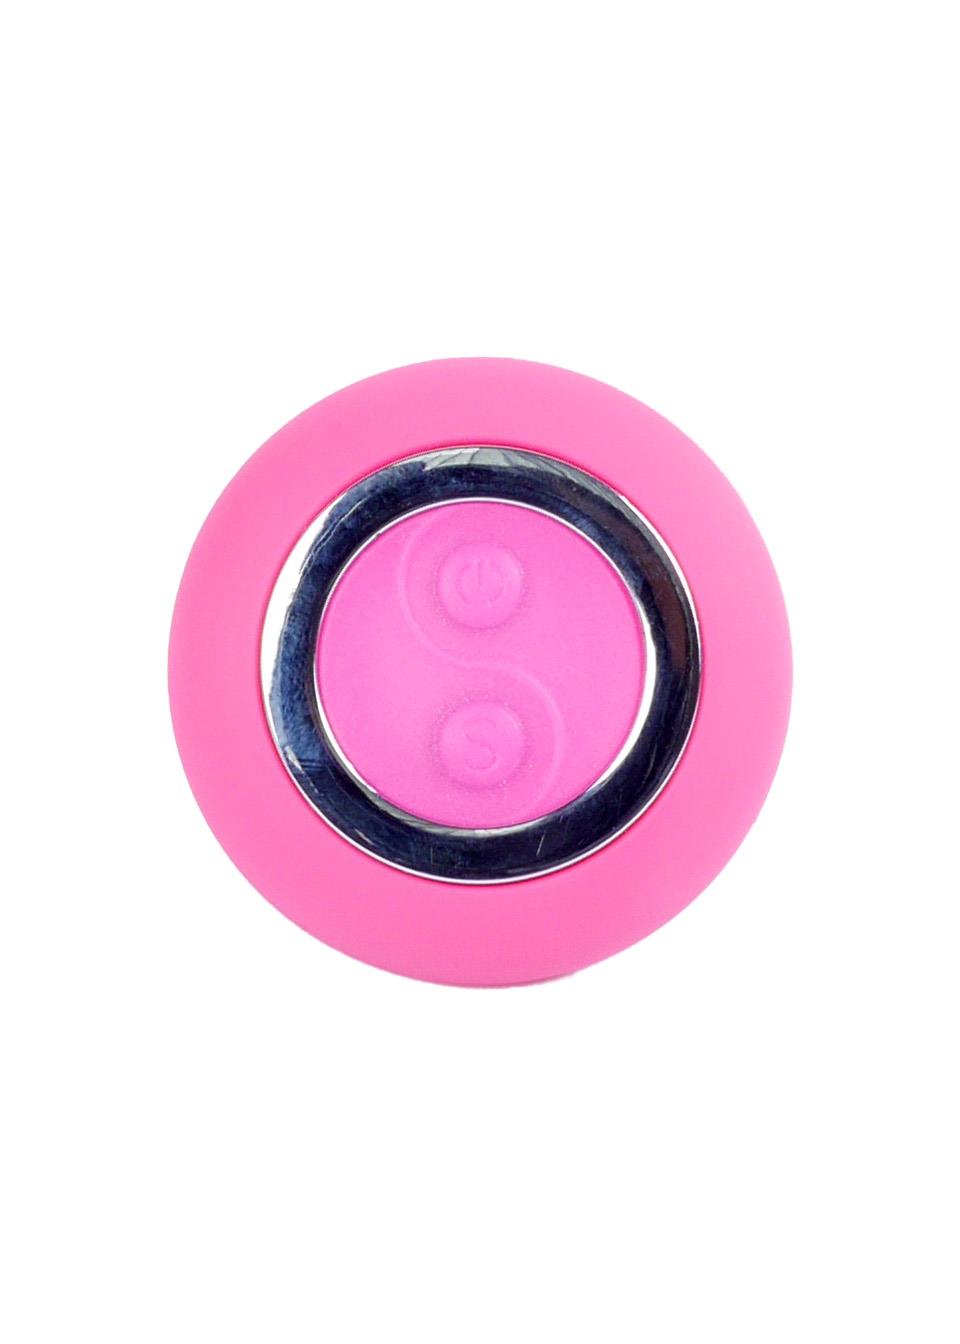 Bossoftoys - 26-00108 - Remoted controller egg - USB - Pink